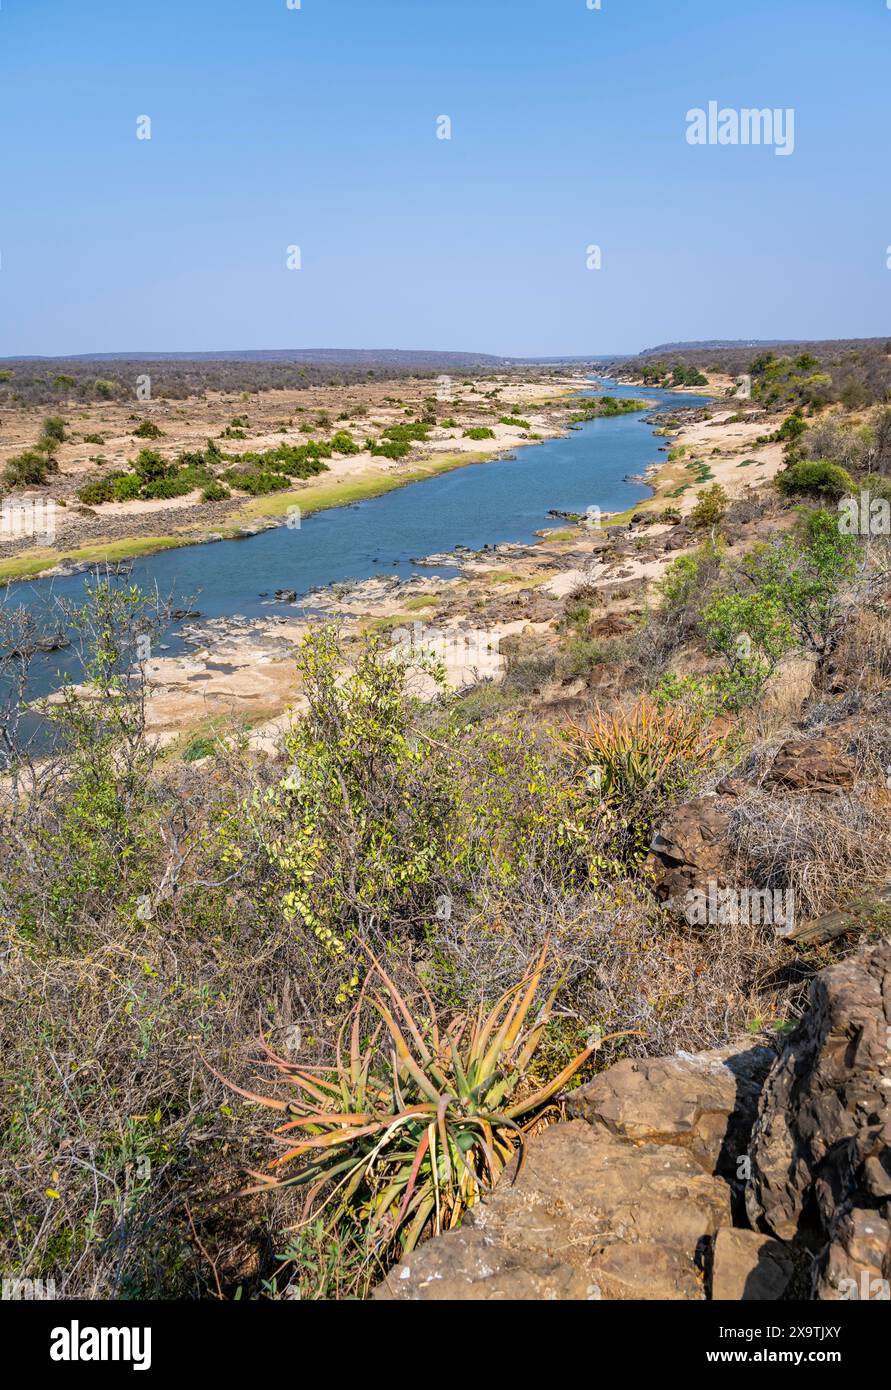 View over dry African savannah, Olifants River, Kruger National Park, South Africa Stock Photo